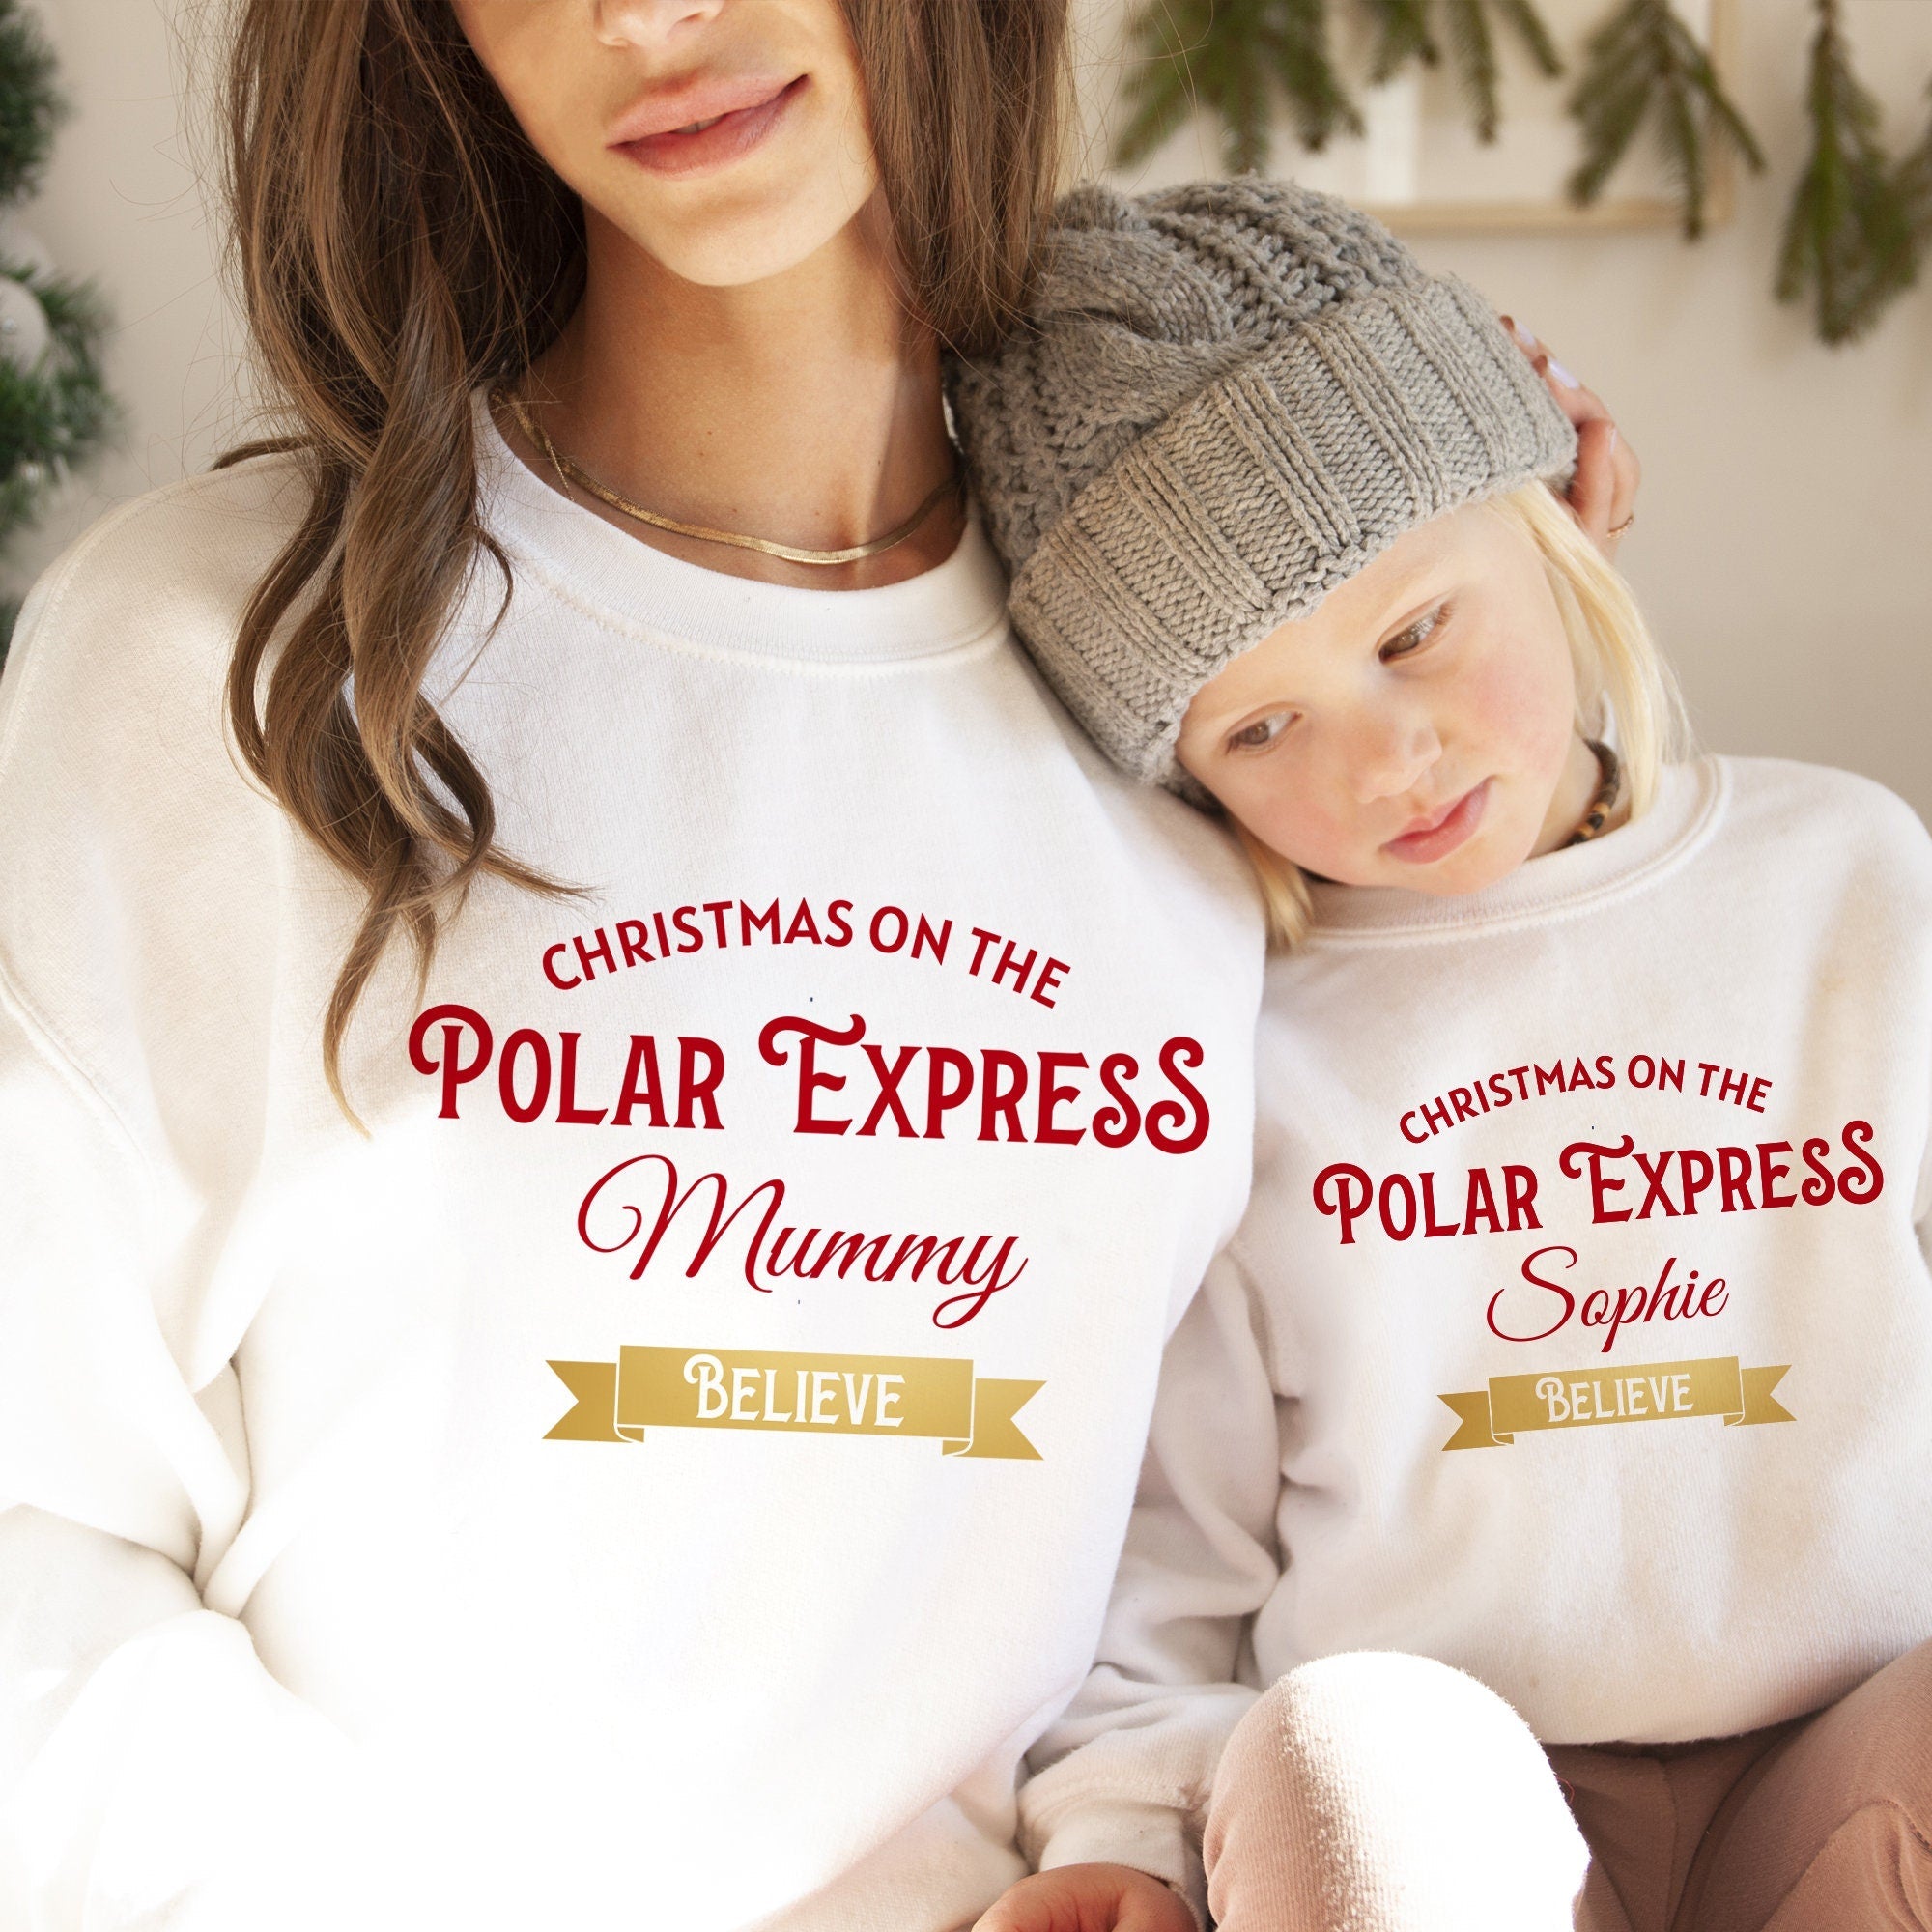 Personalised Polar Express Family Christmas Jumper with names and gold foil believe detail